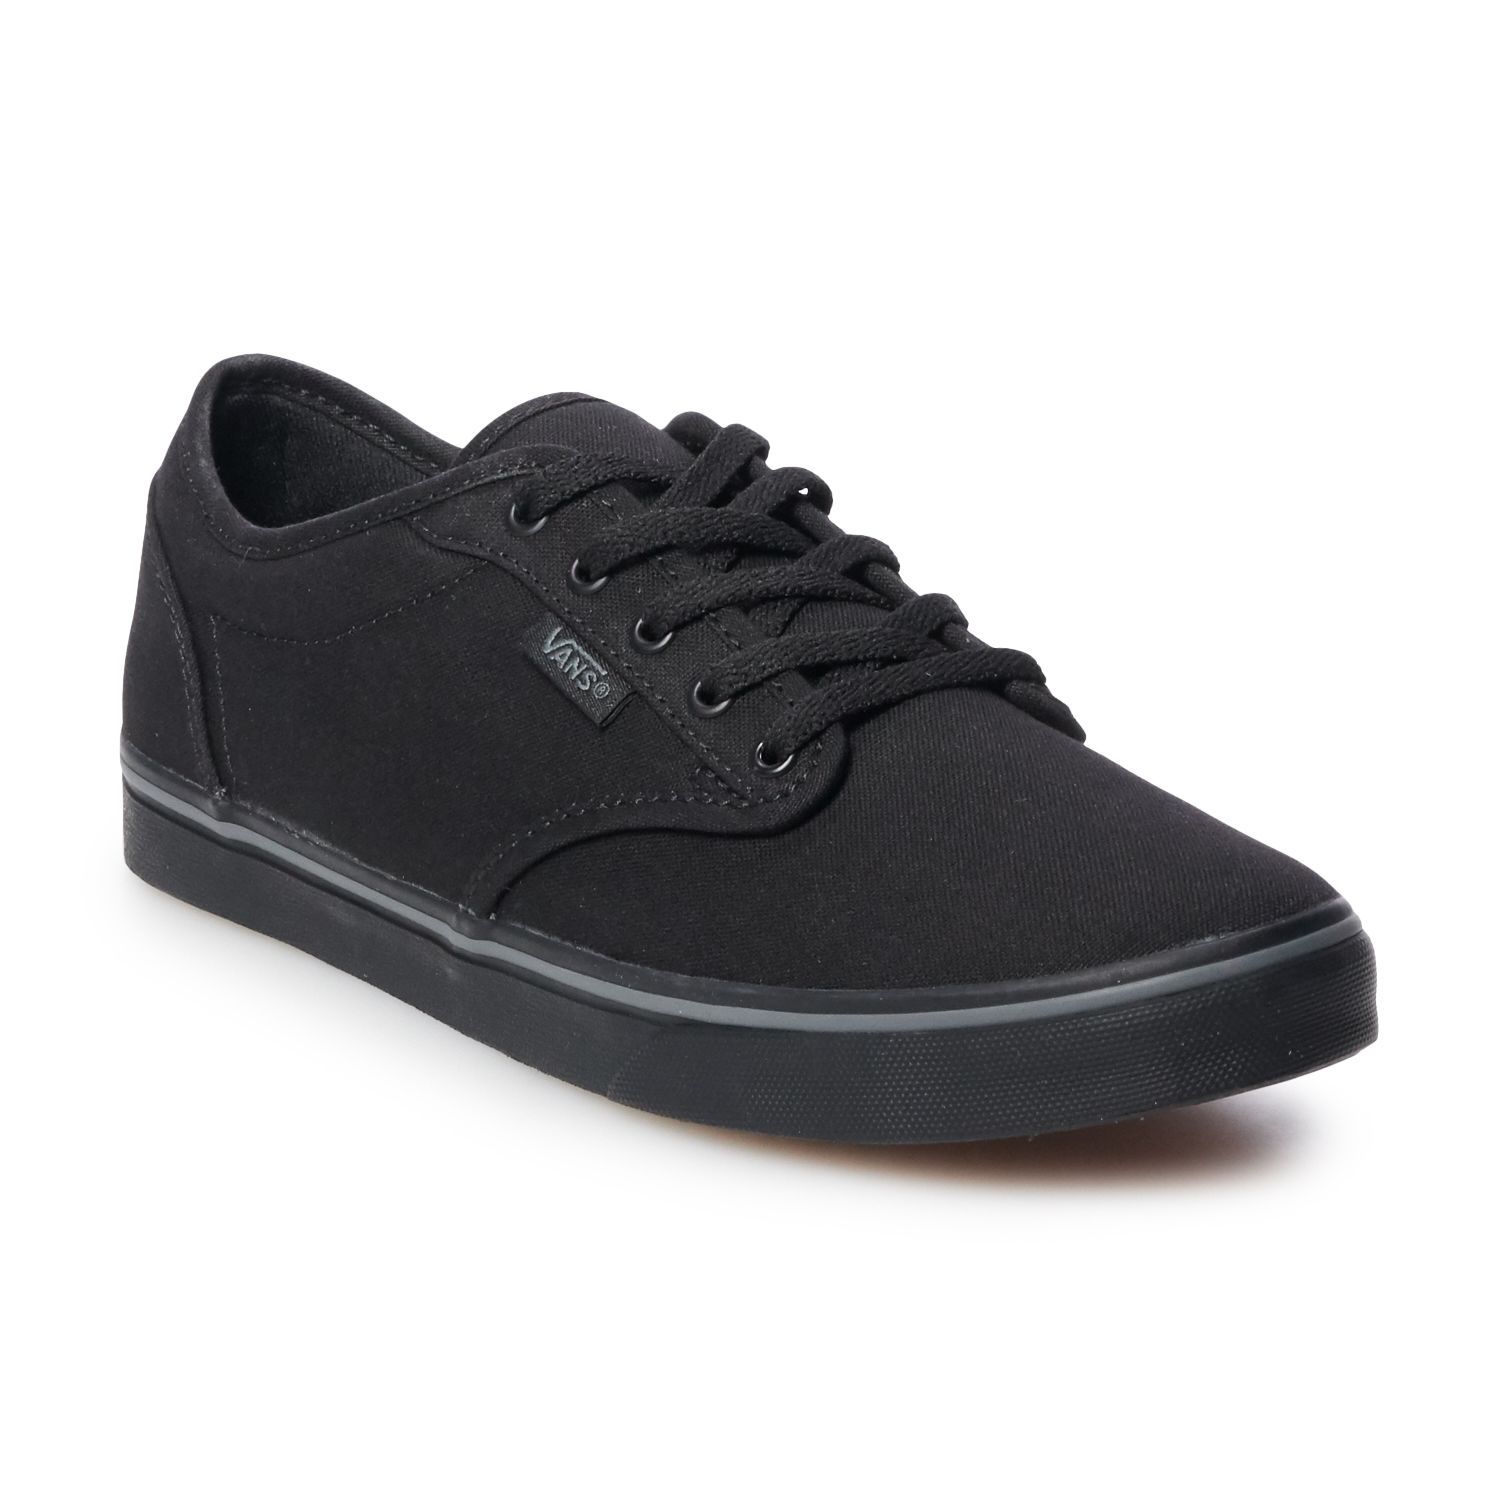 vans atwood low mujer